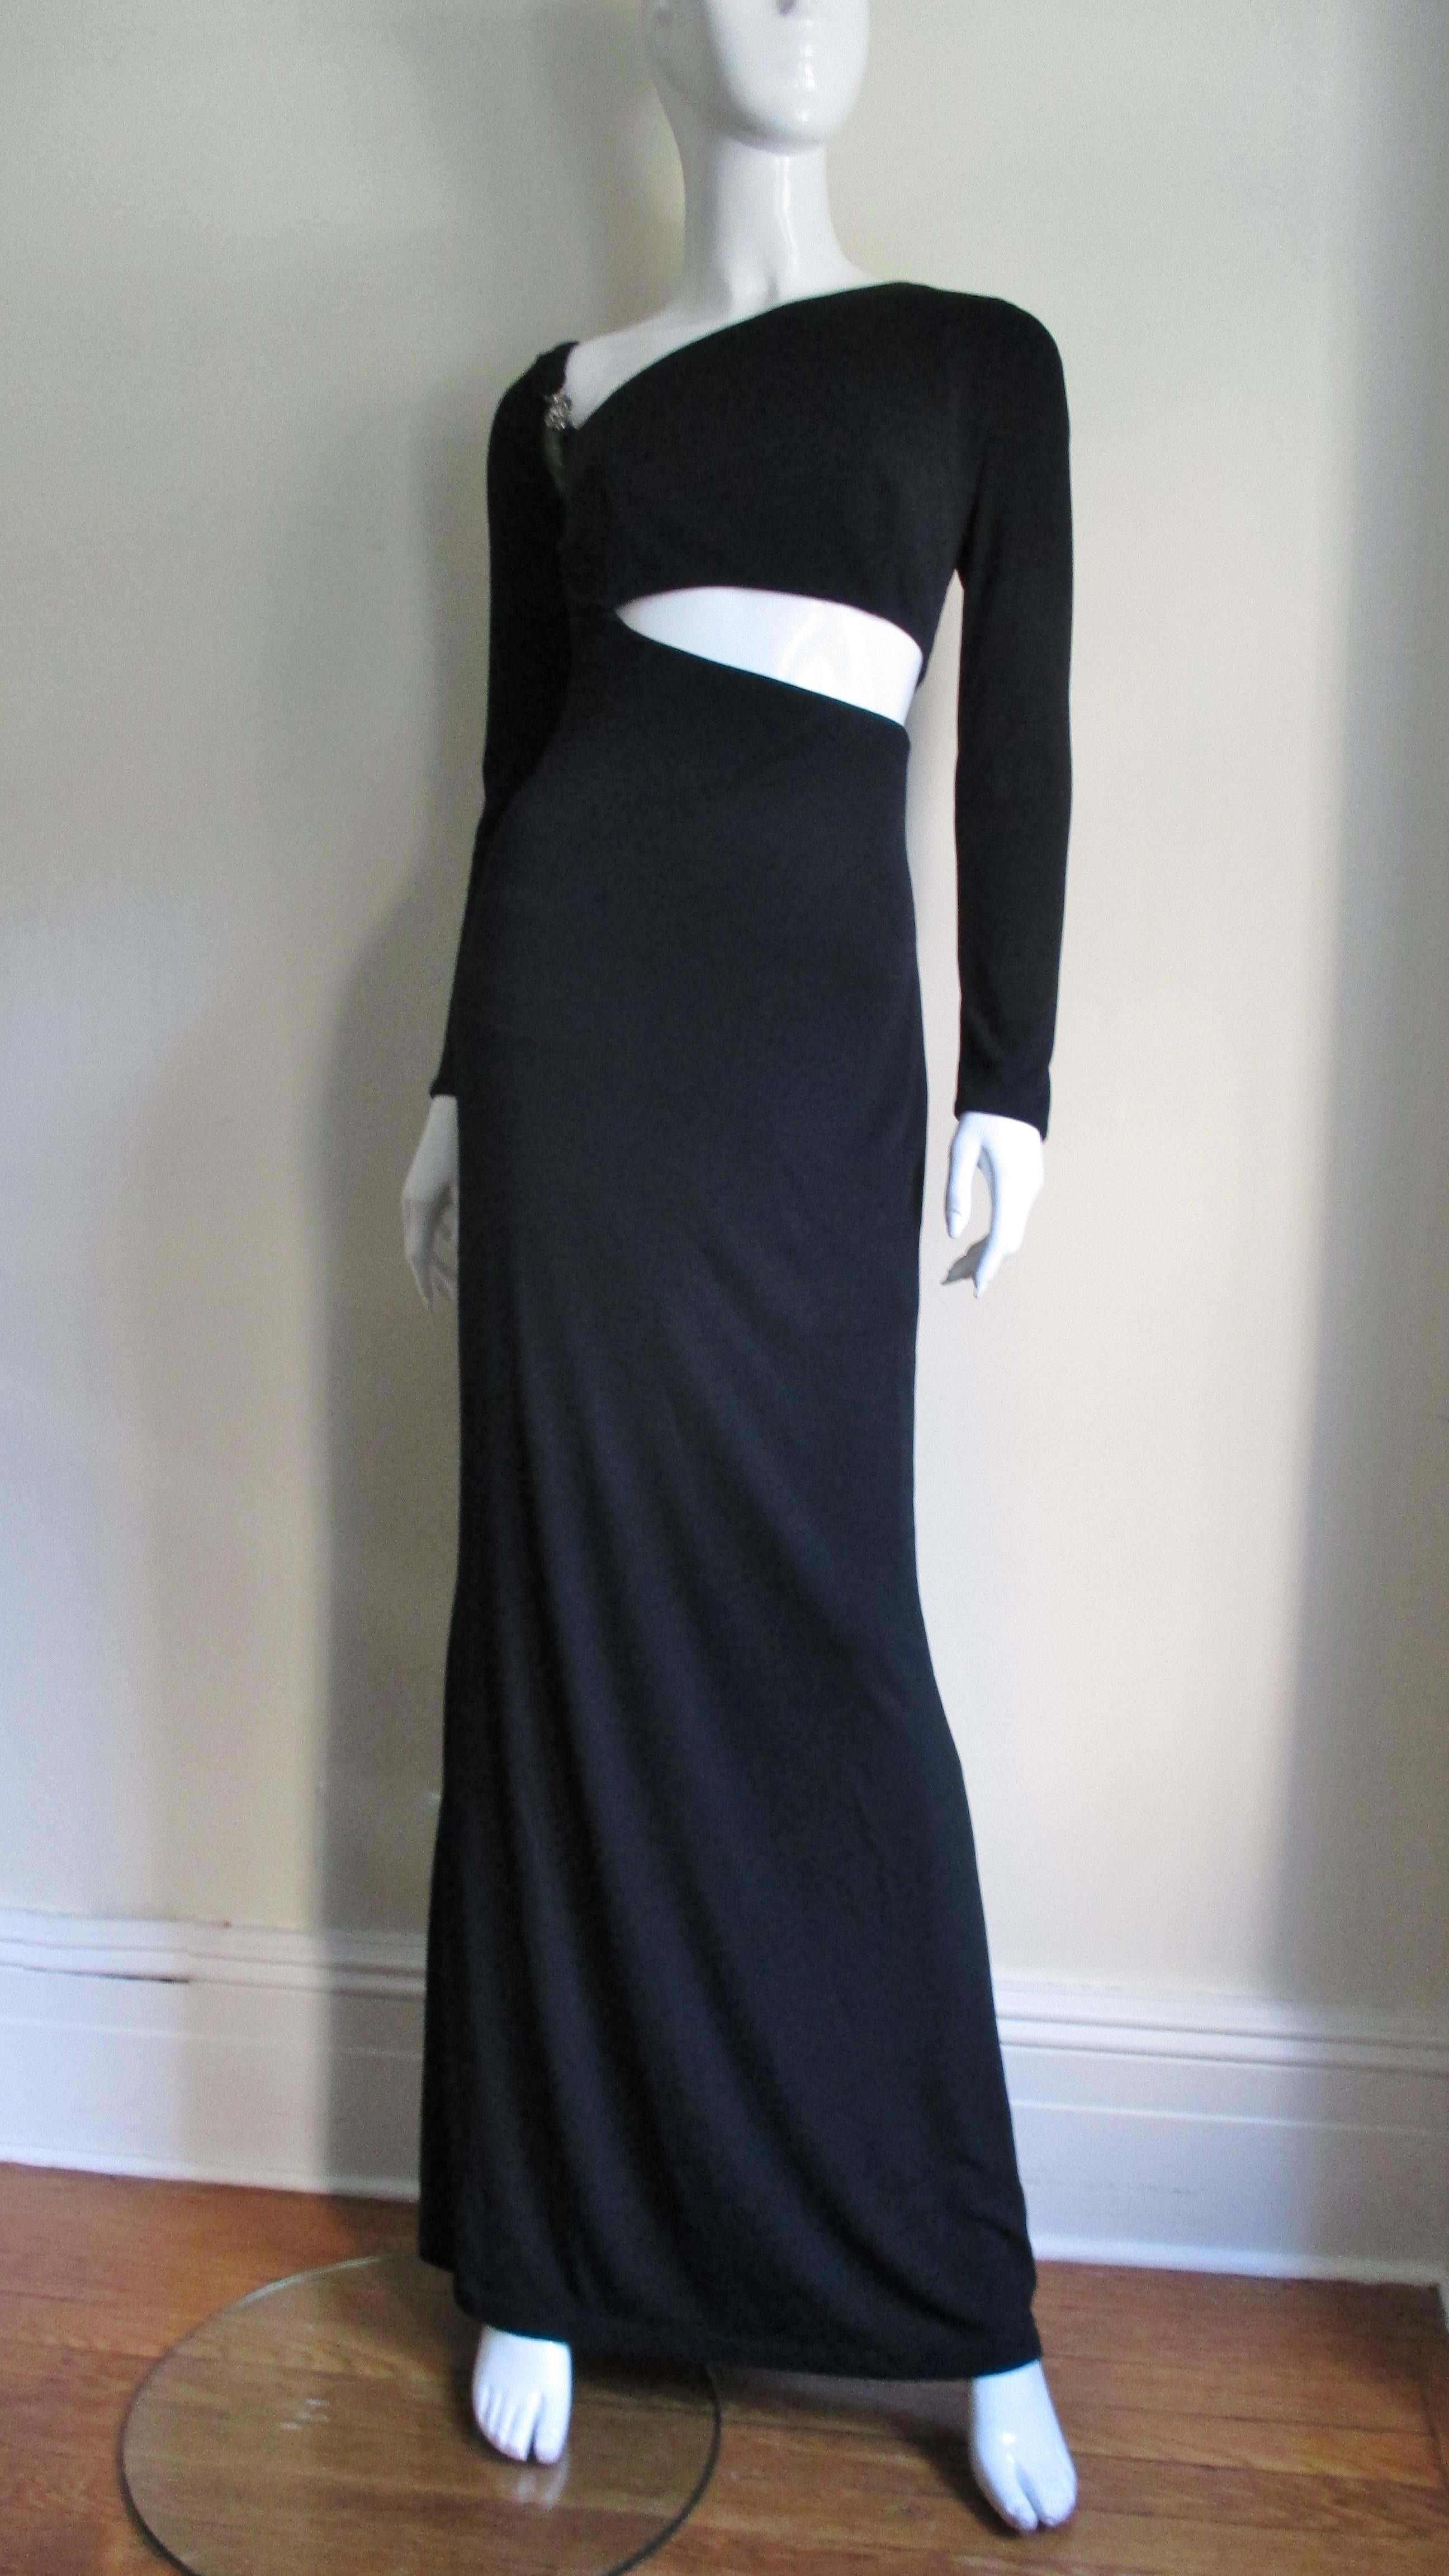 Gianni Versace Cut out Gown 1990s In Good Condition For Sale In Water Mill, NY